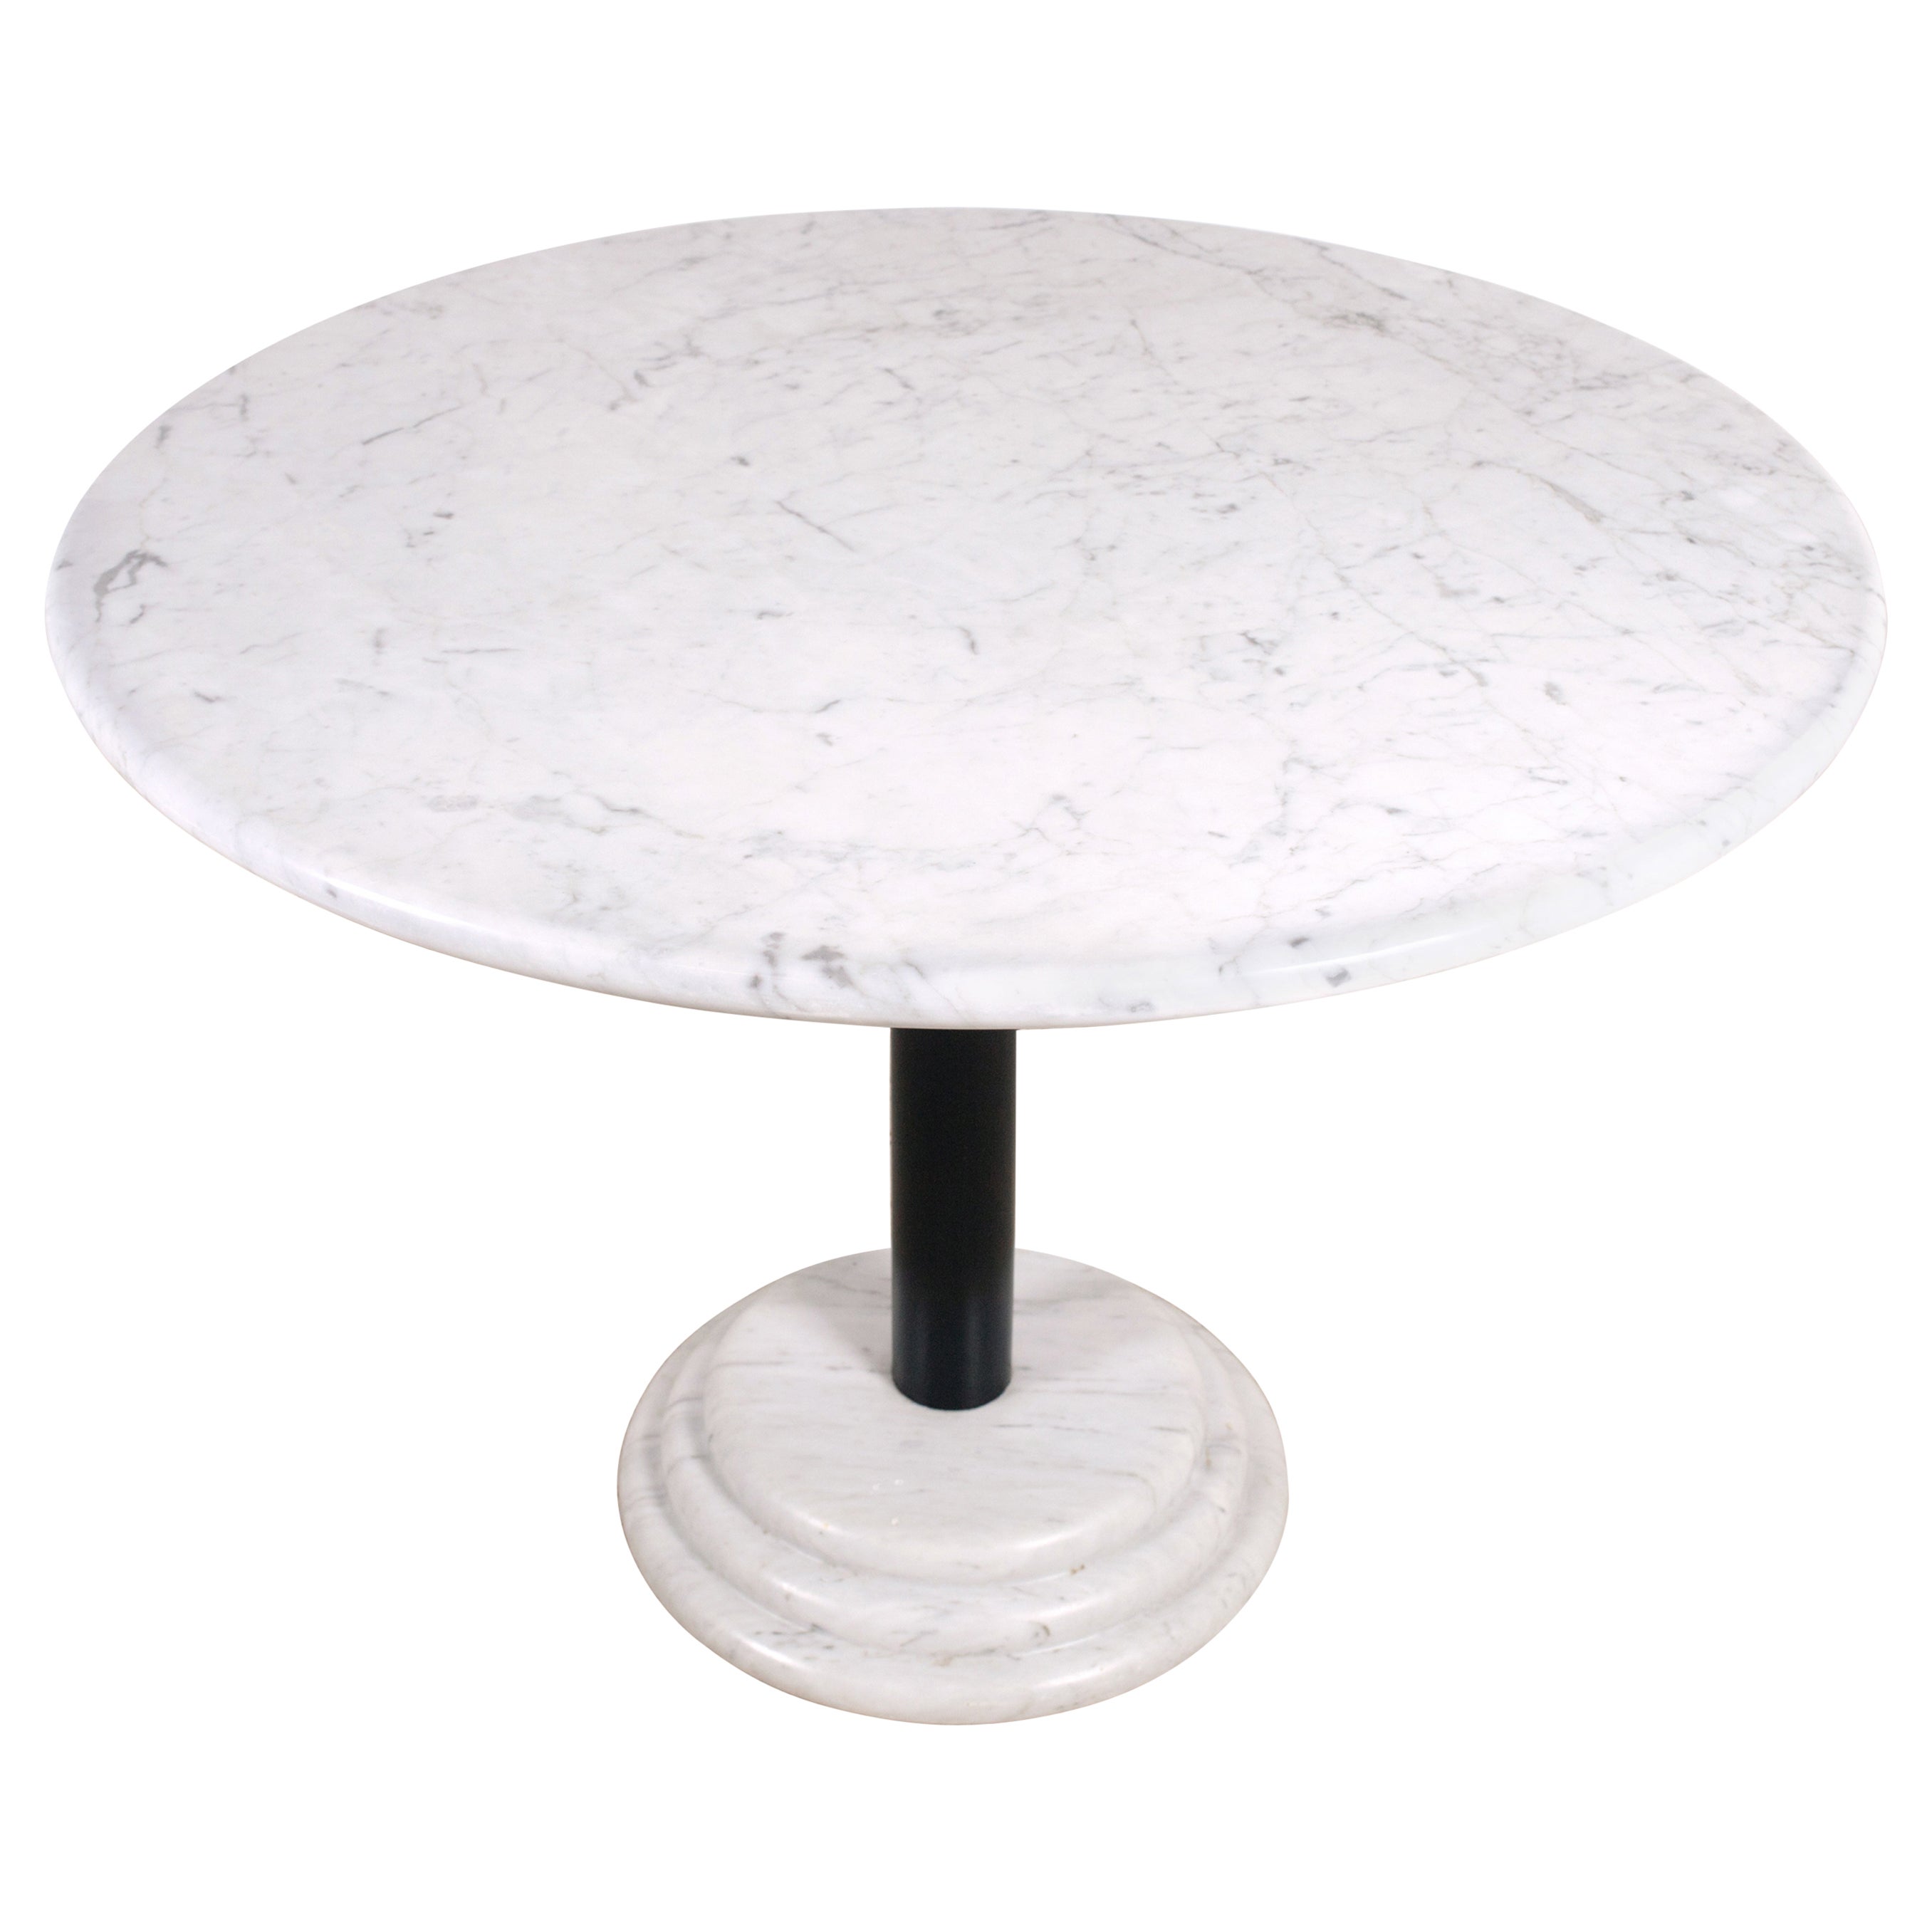 1980s Ettore Sottsass Attributed Round Carrara Marble Dining Table, Italy